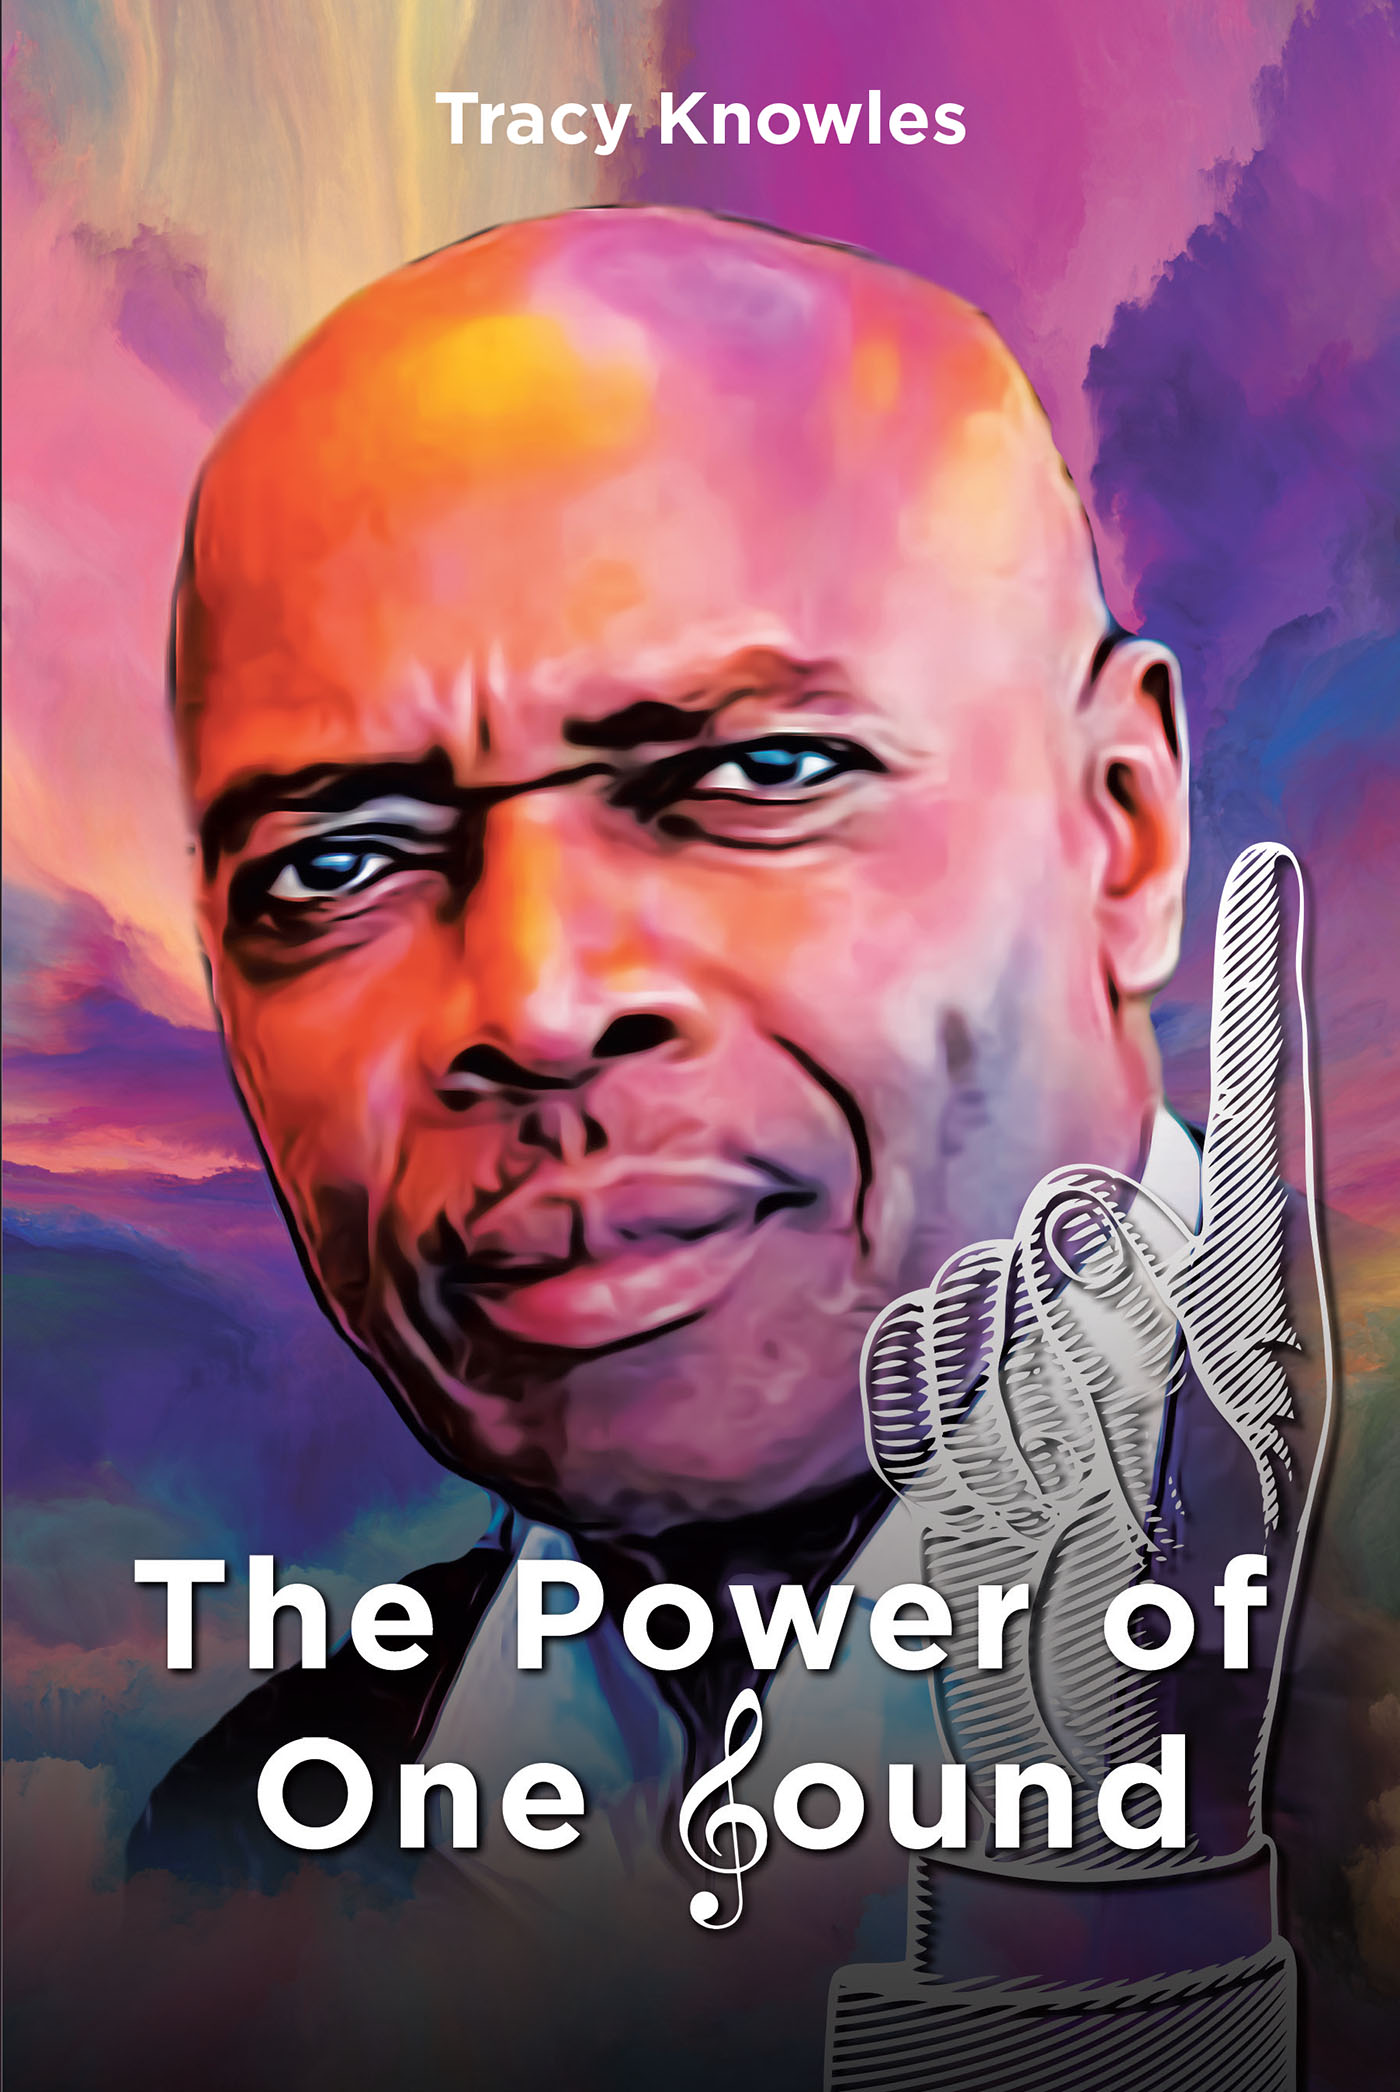 Tracy Knowles’s Newly Released "The Power of One Sound" is an Uplifting Message of the Power of Unity